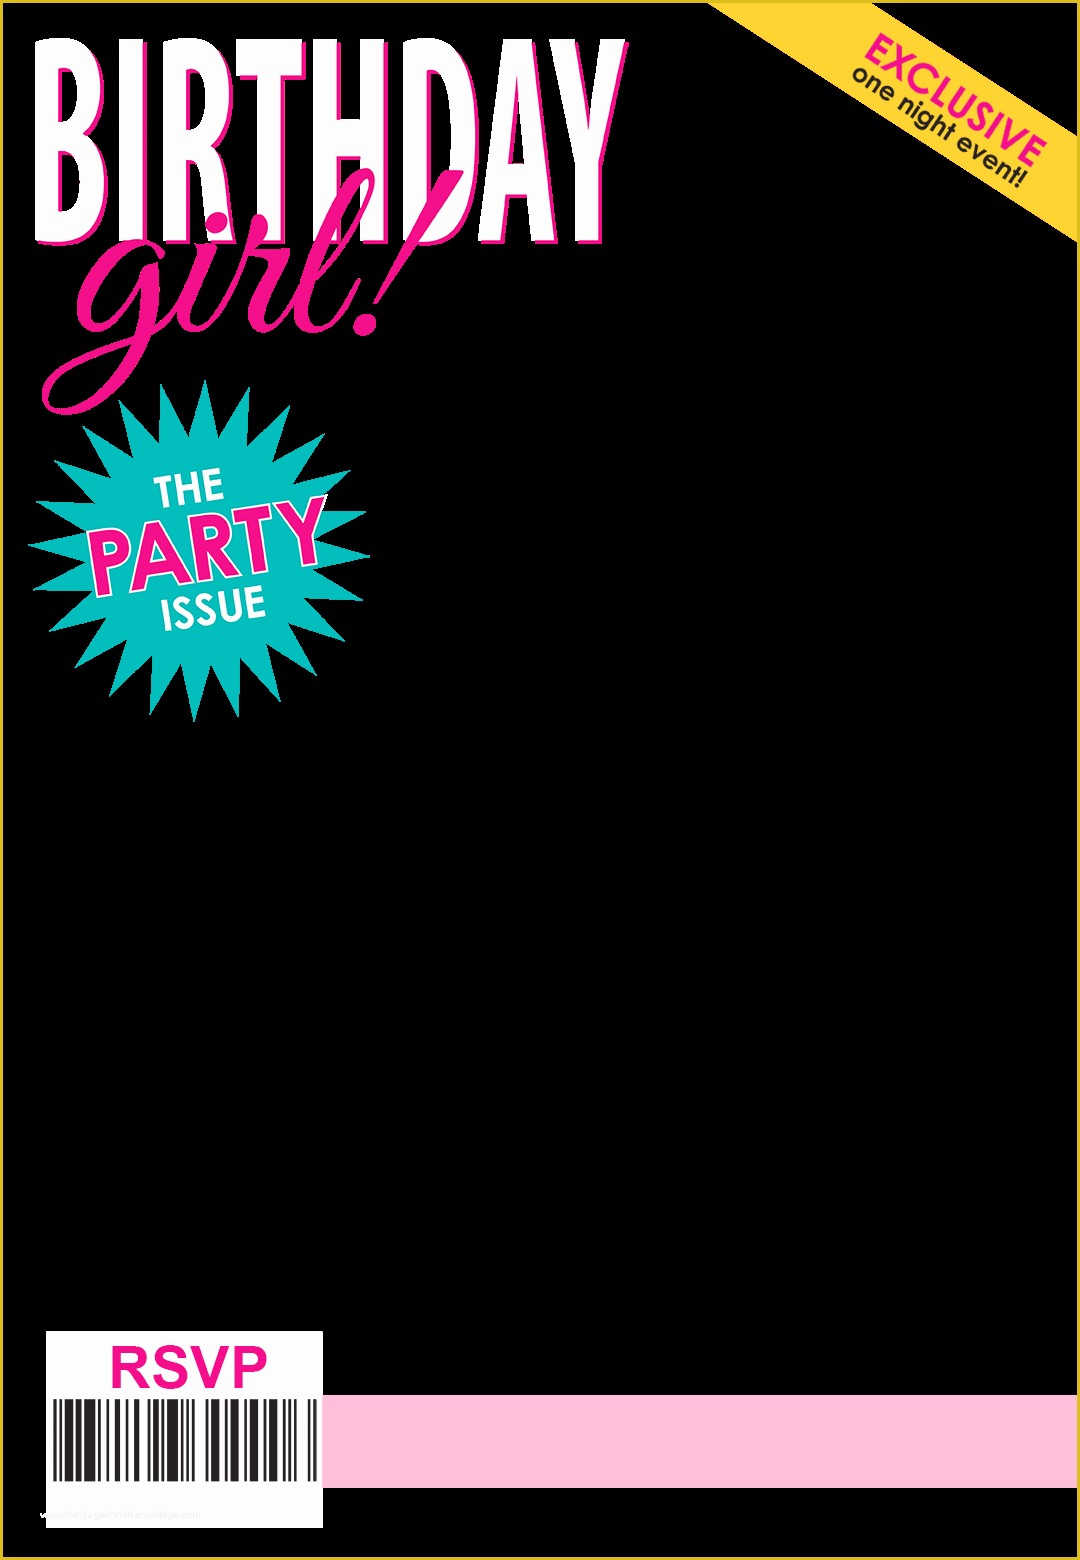 Free Magazine Cover Template Of the Party issue Magazine Cover Free Printable Birthday